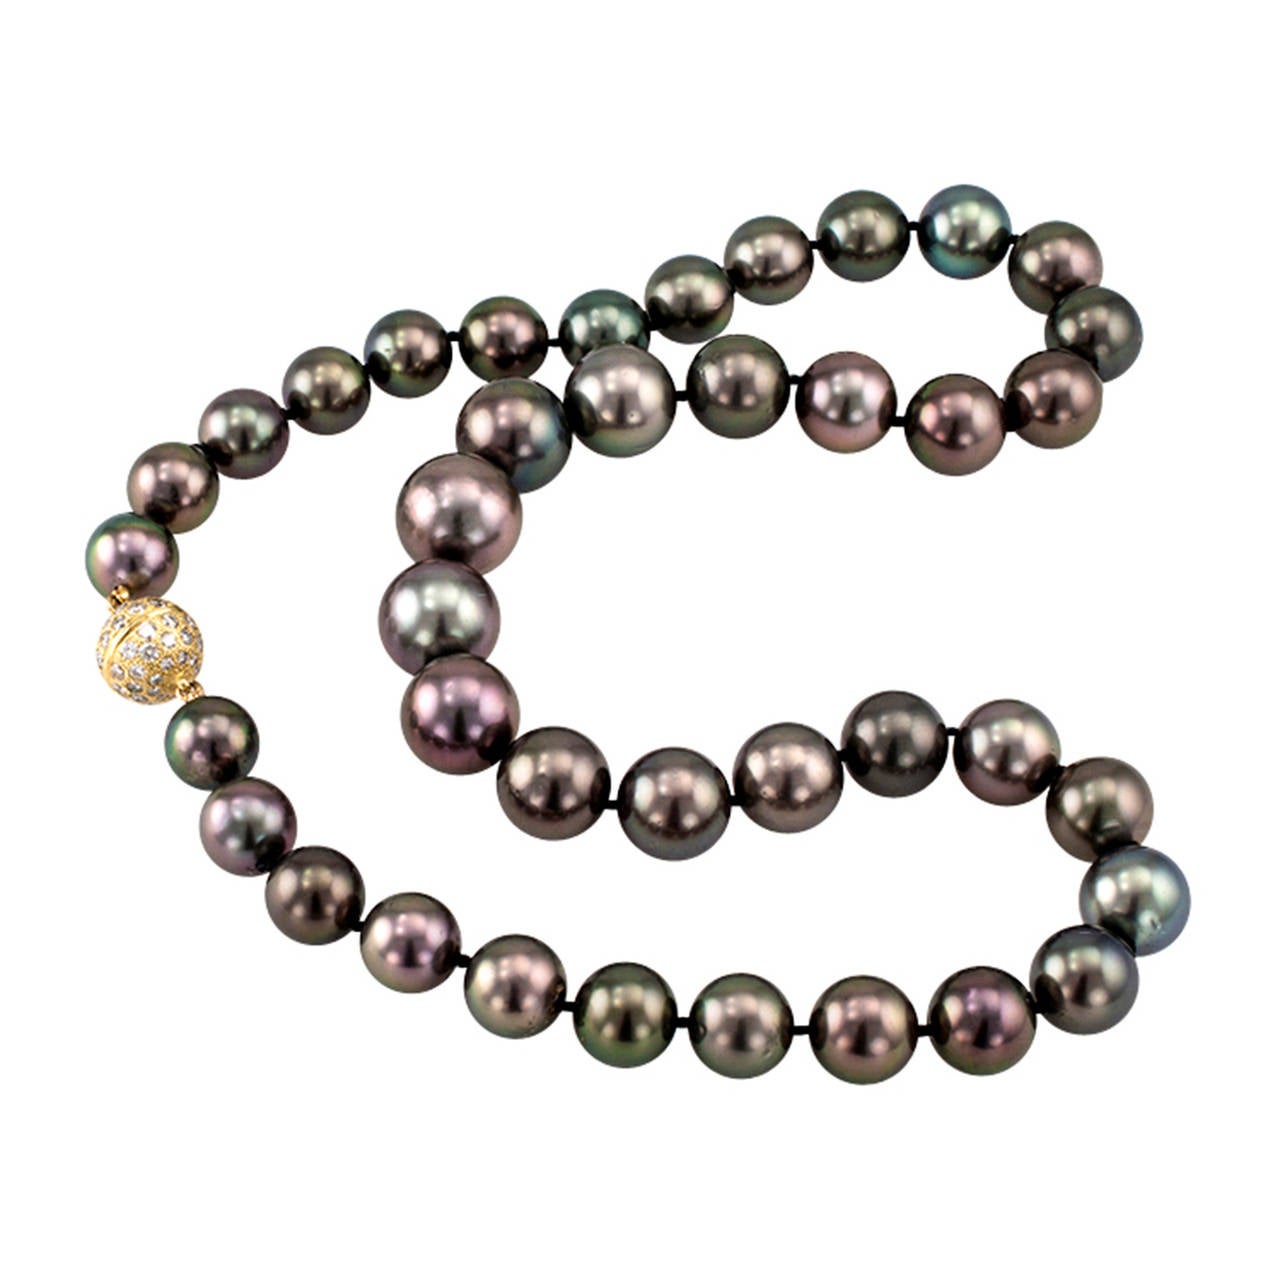 Black Tahitian Cultured Pearl Necklace